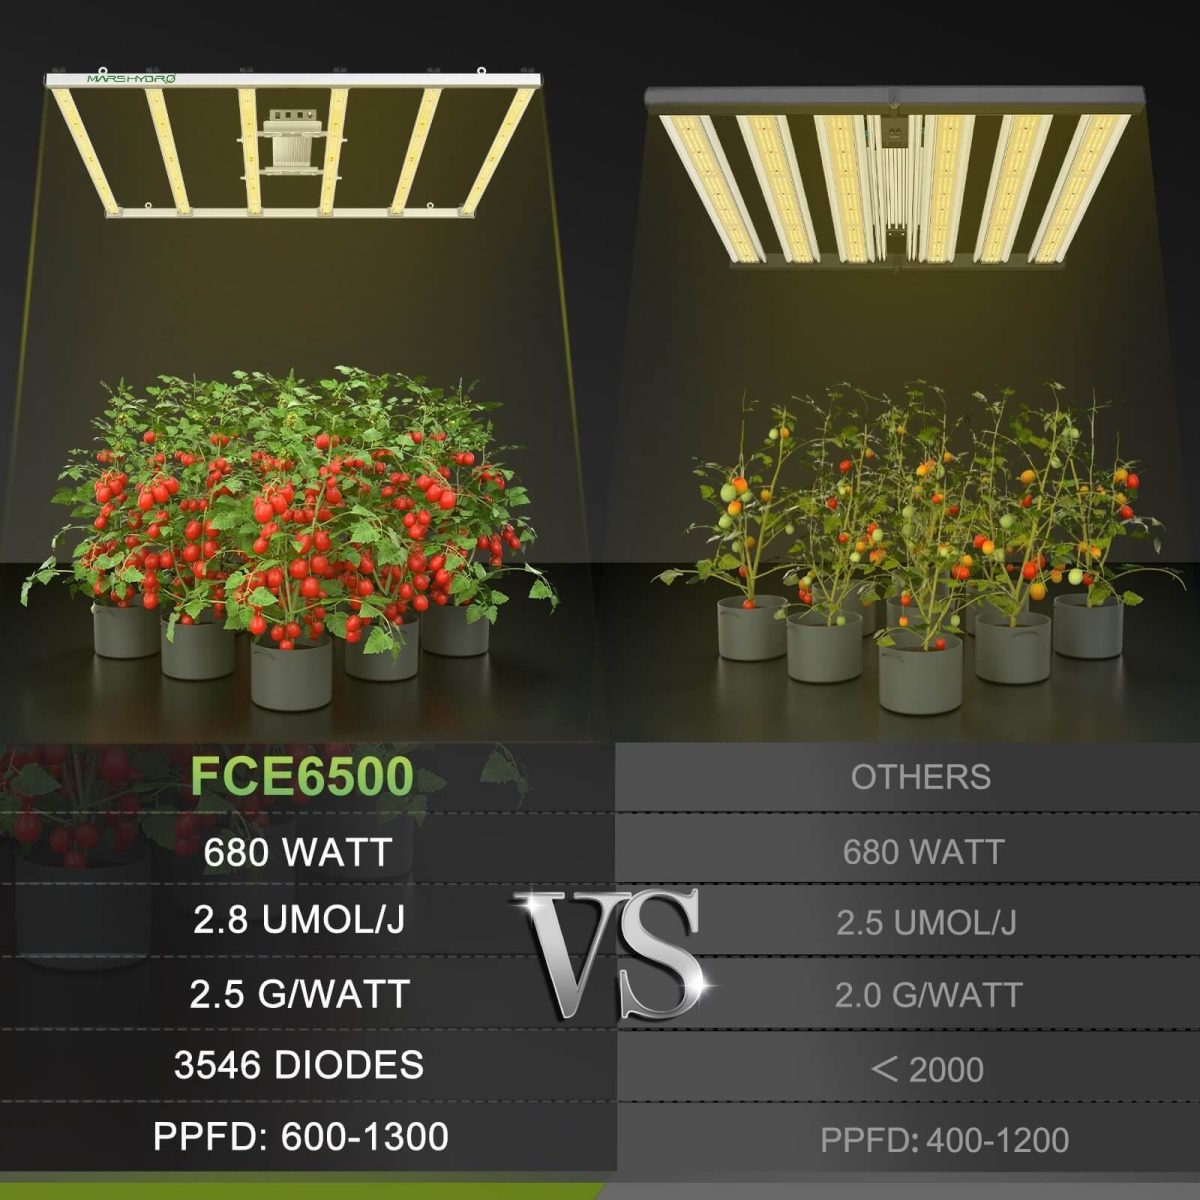 FC-E6500 led grow light is much better than other 680w lights in PPFD, diode brand, PPE, max yield.